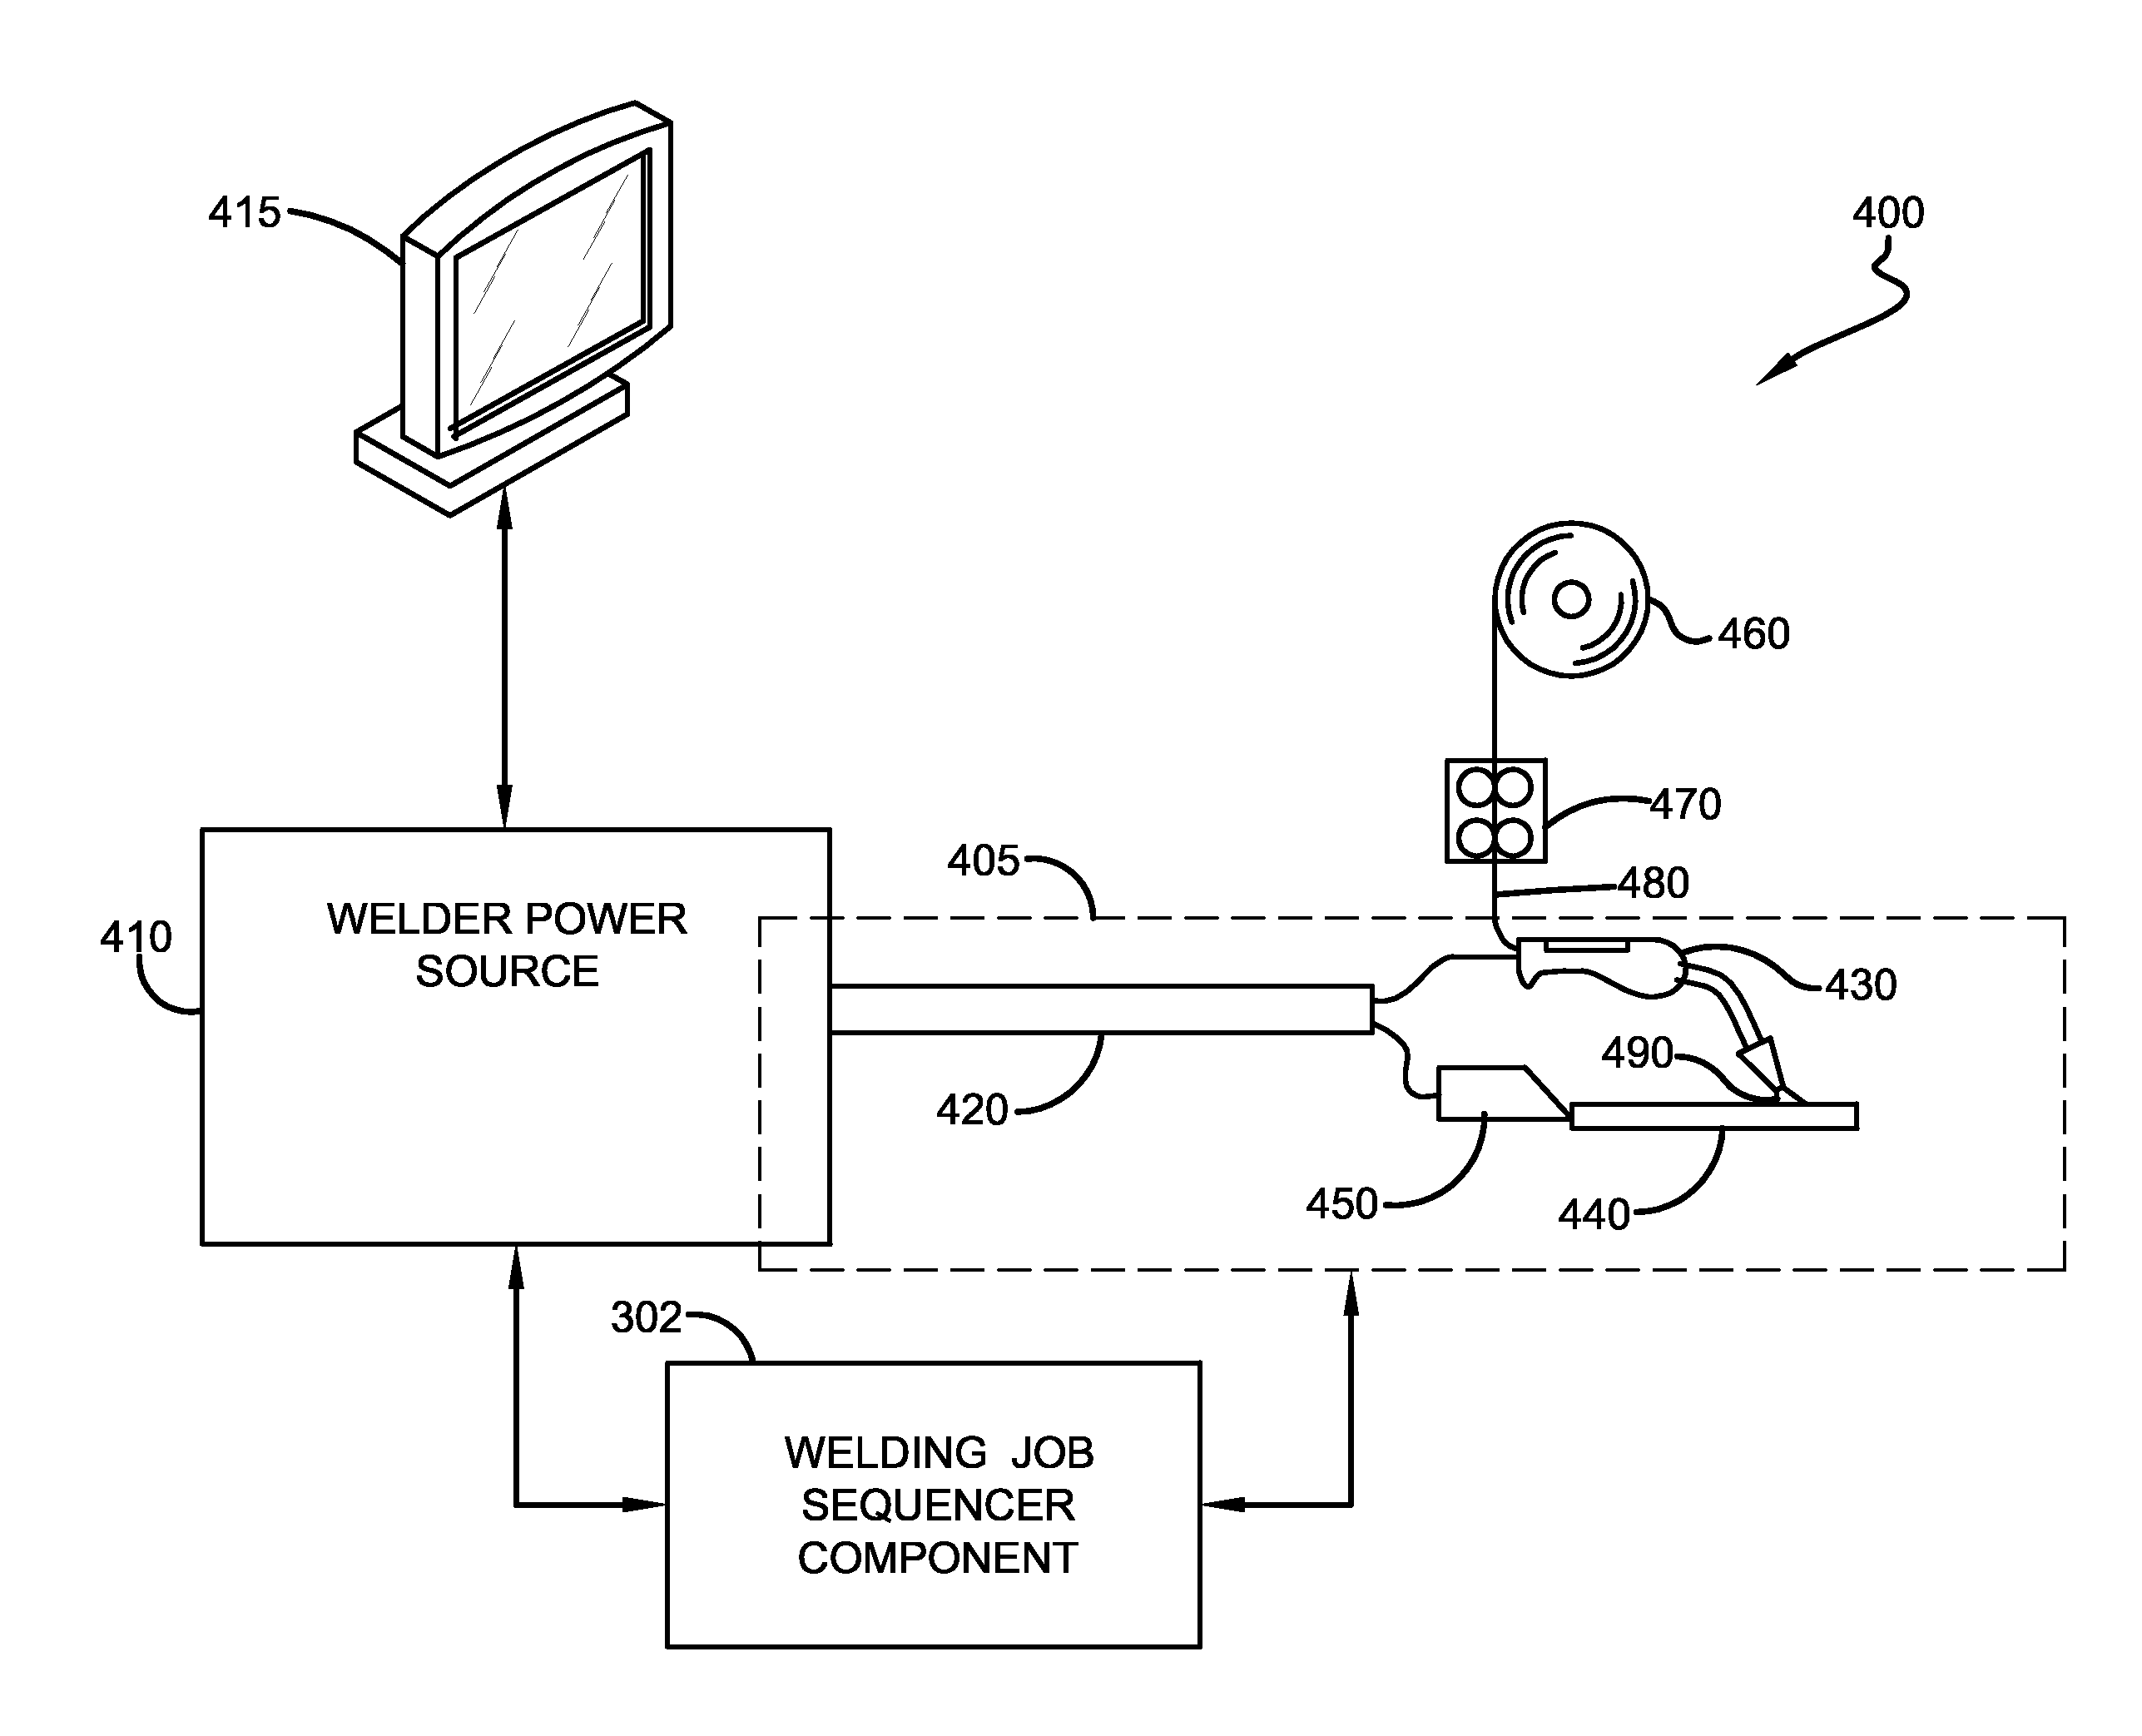 System and method of receiving or using data from external sources for a welding sequence